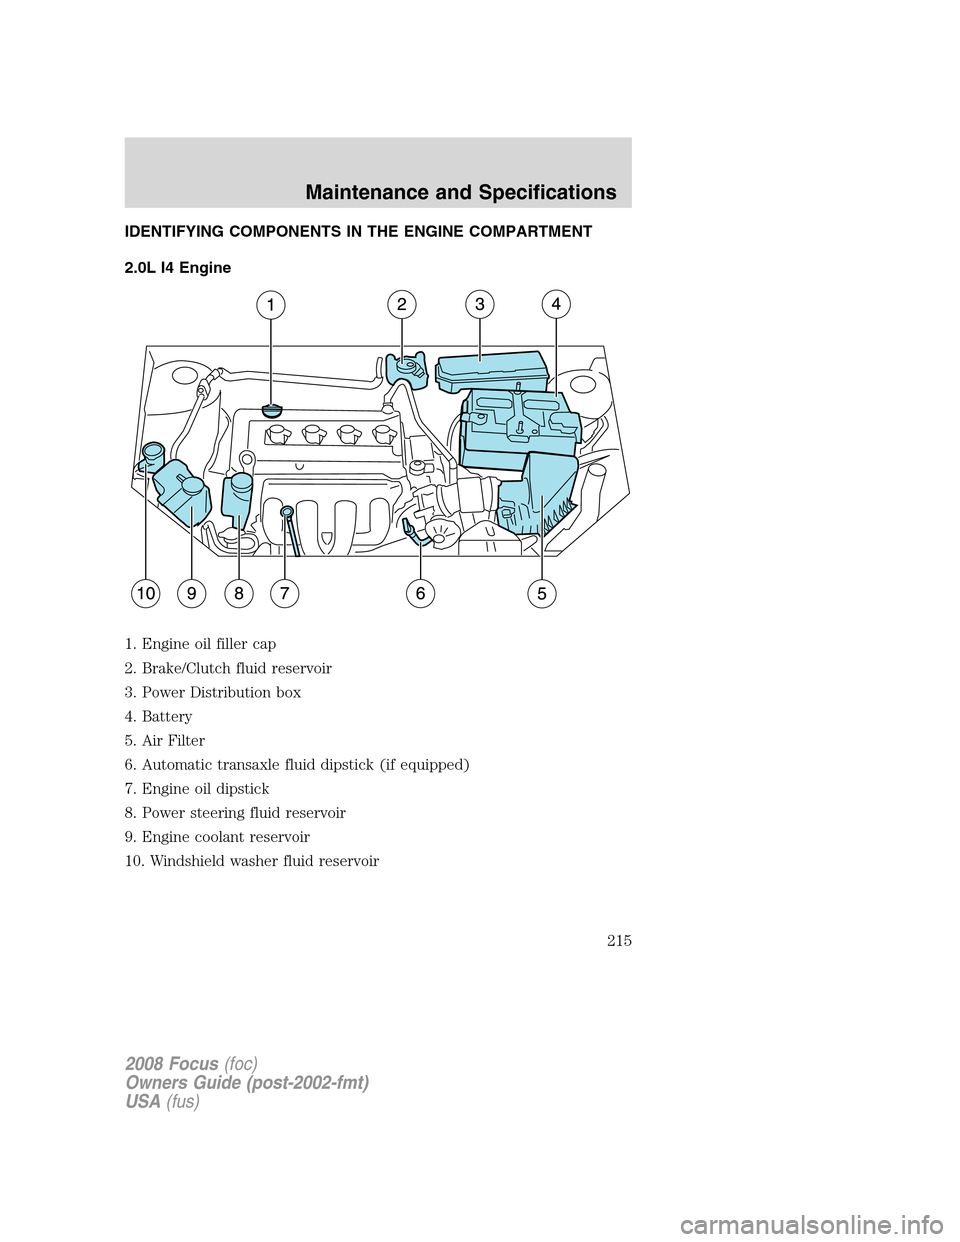 FORD FOCUS 2008 2.G Owners Manual IDENTIFYING COMPONENTS IN THE ENGINE COMPARTMENT
2.0L I4 Engine
1. Engine oil filler cap
2. Brake/Clutch fluid reservoir
3. Power Distribution box
4. Battery
5. Air Filter
6. Automatic transaxle fluid